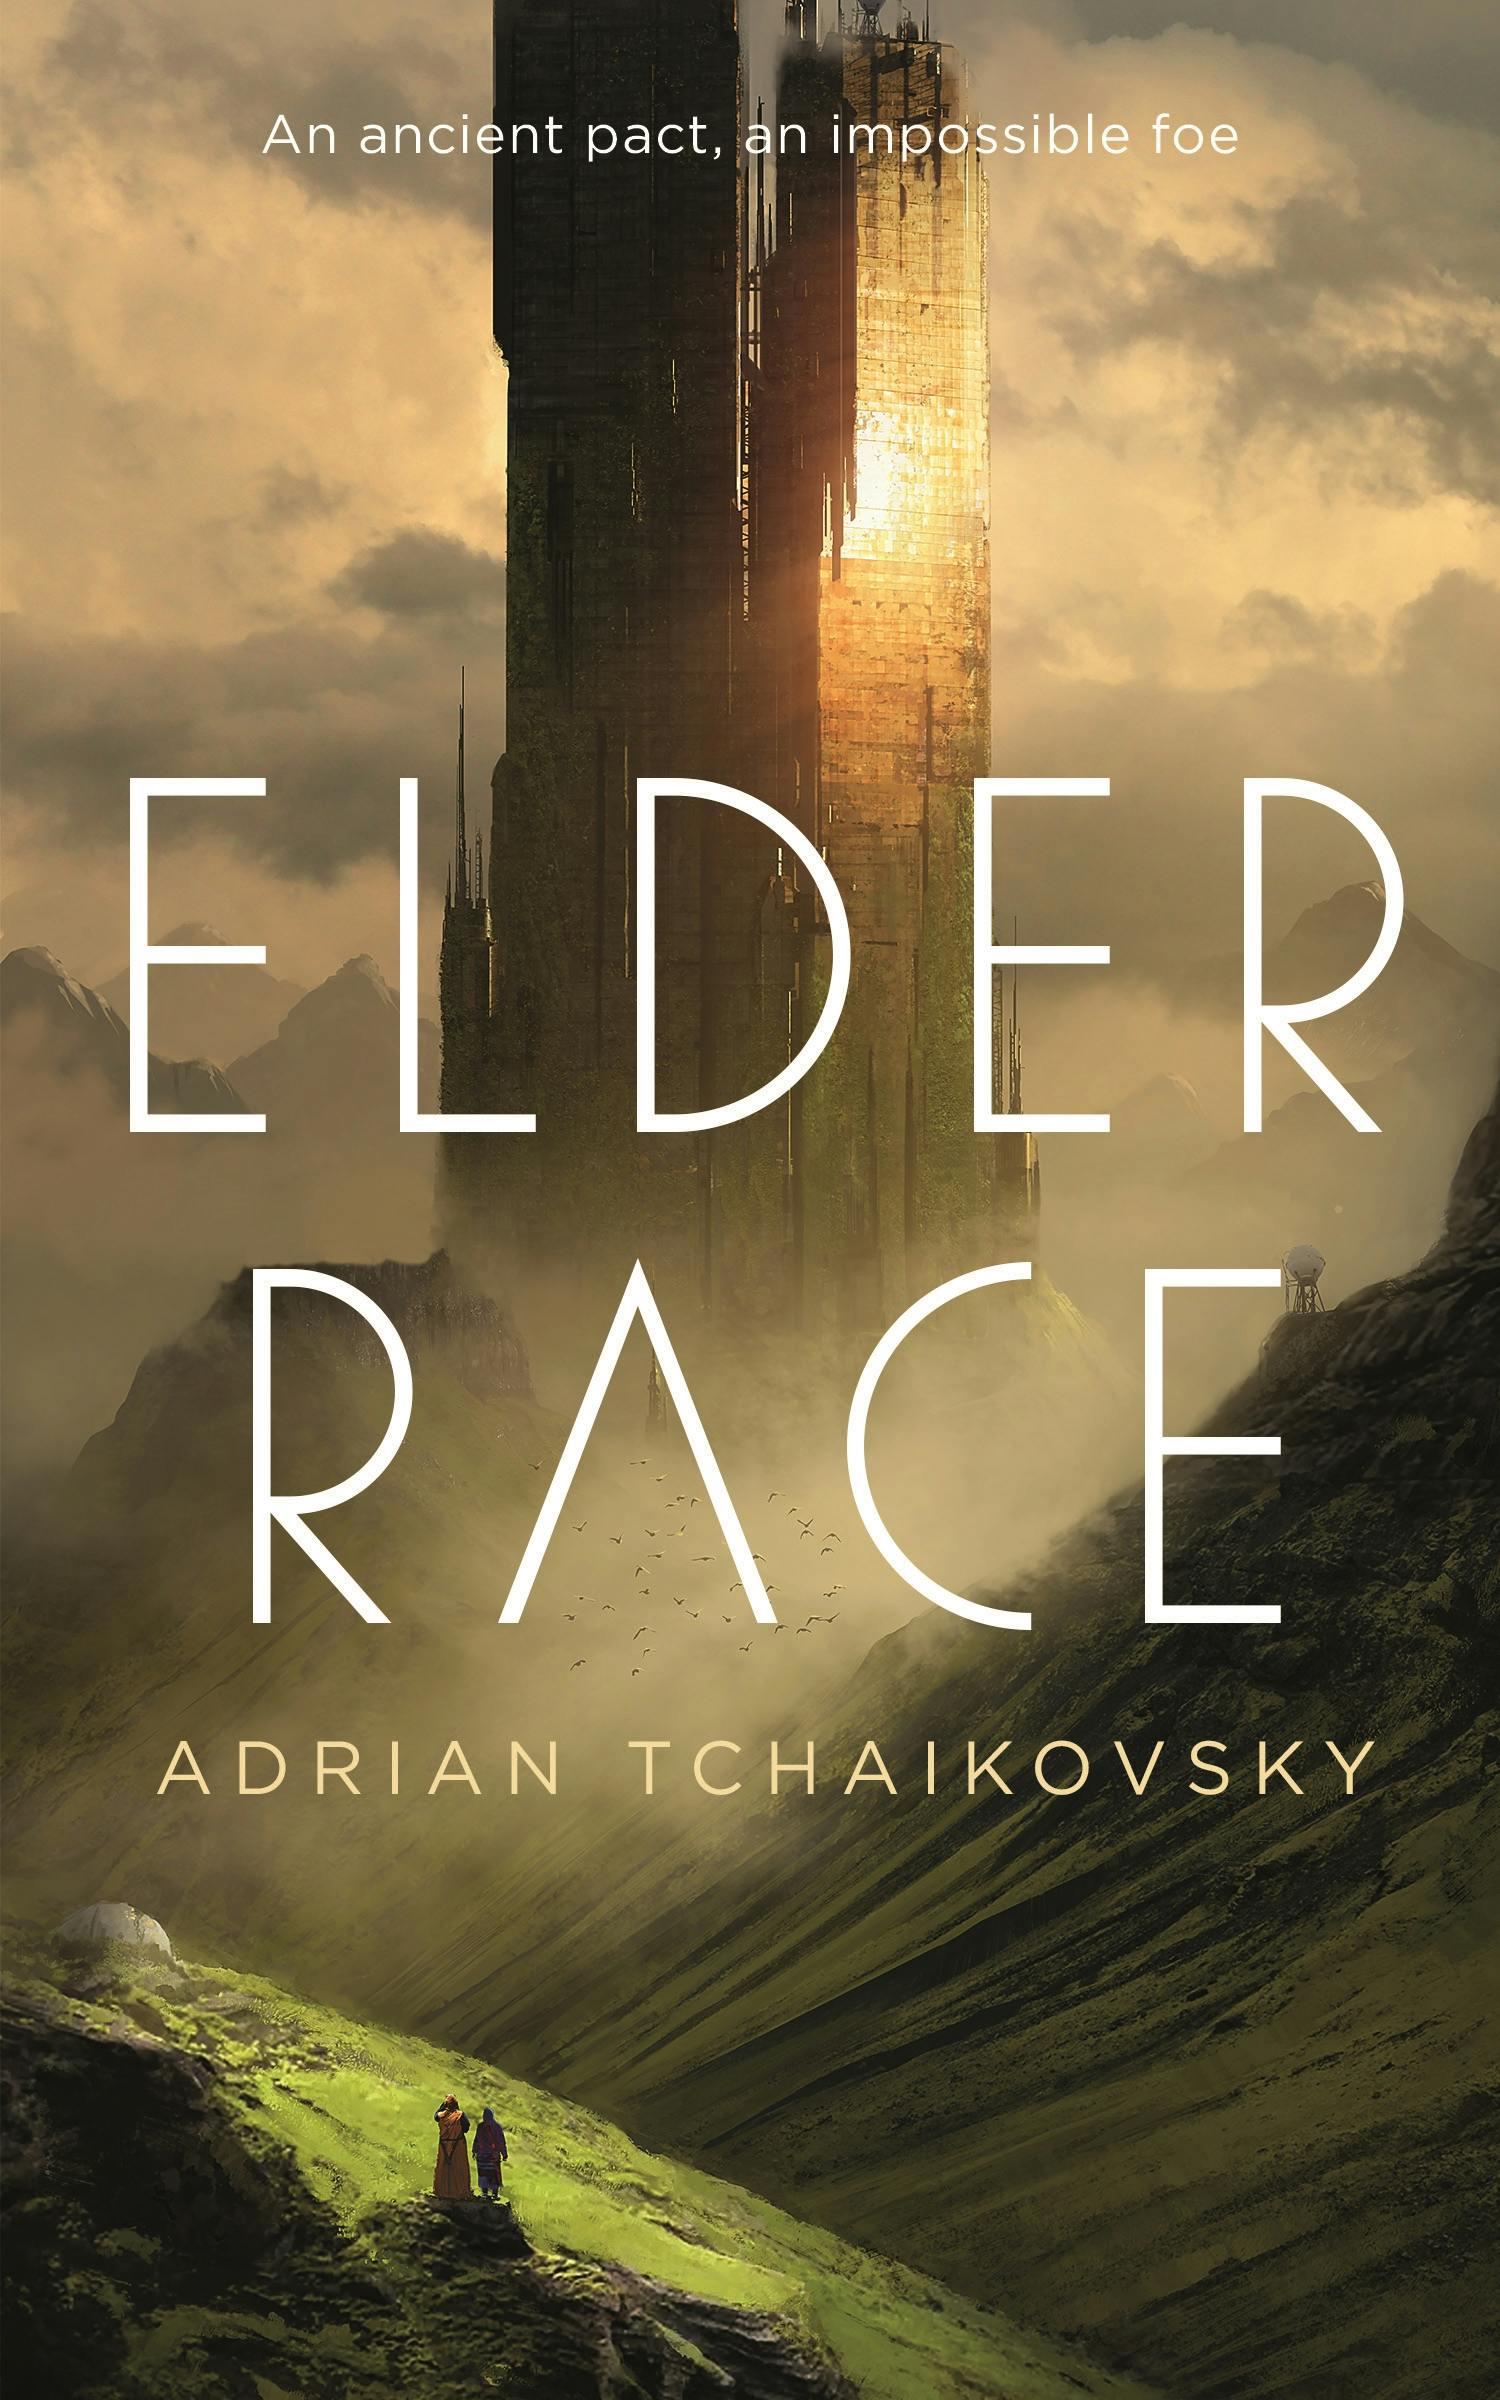 Cover for the book titled as: Elder Race